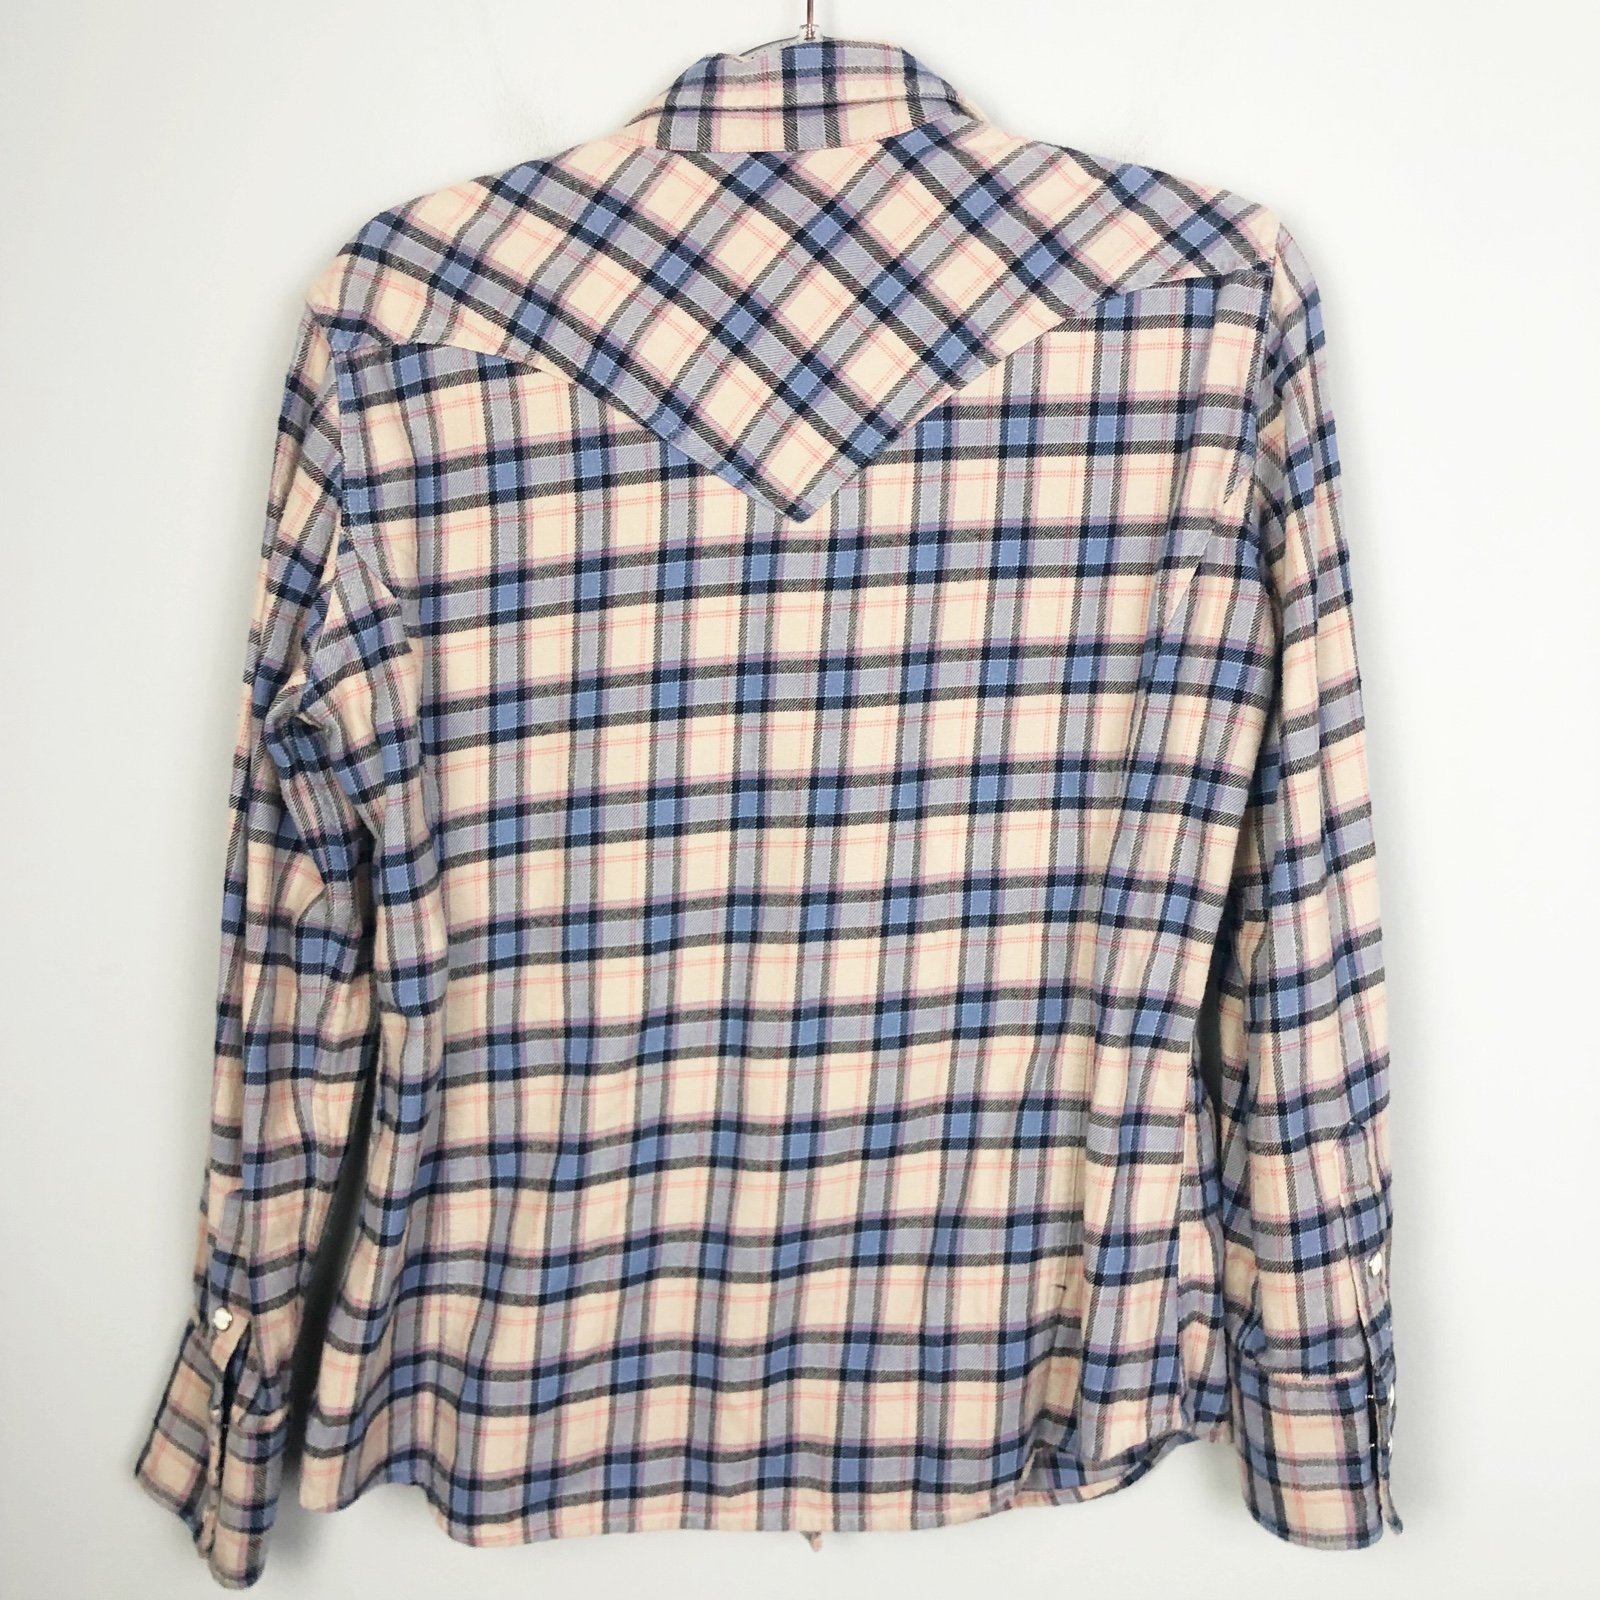 Simple CARHARTT | Tan & Blue Snap Front Plaid Flannel Long Sleeve Top Women’s Size M km1iQZyqg hot sale